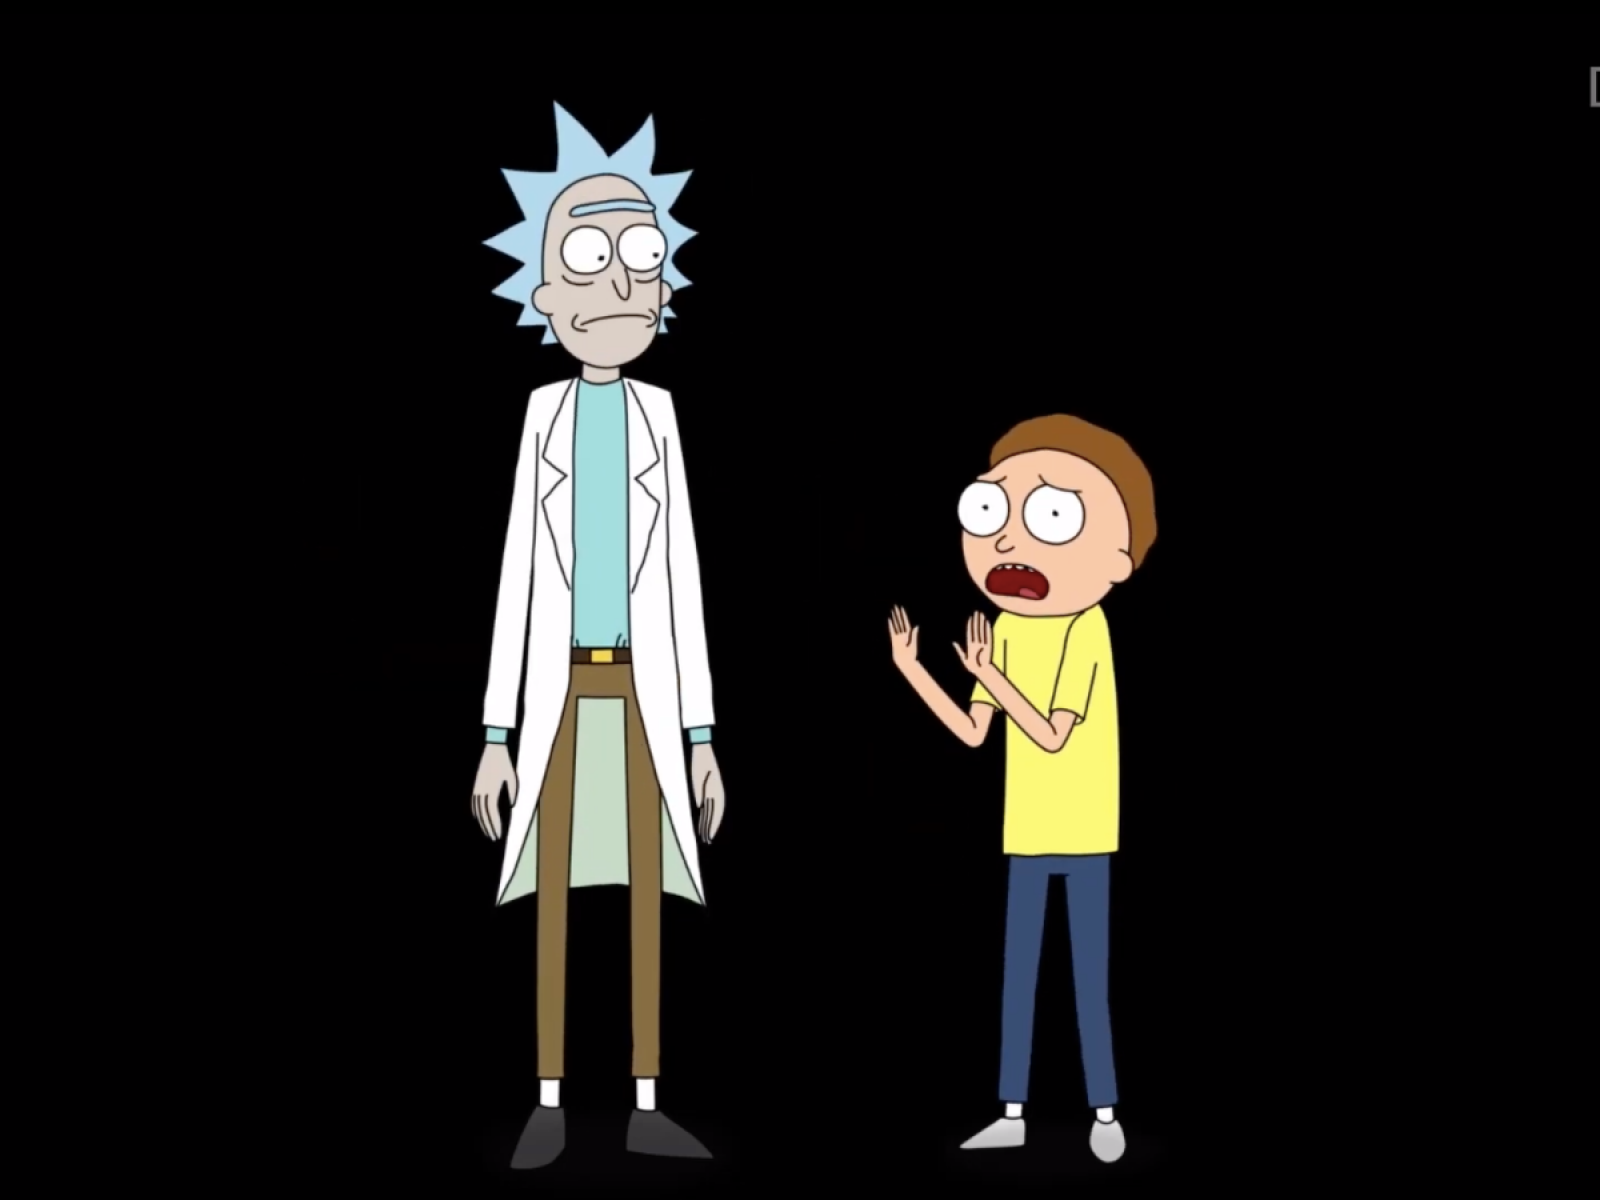 Rick and Morty' Season 4 Episode to